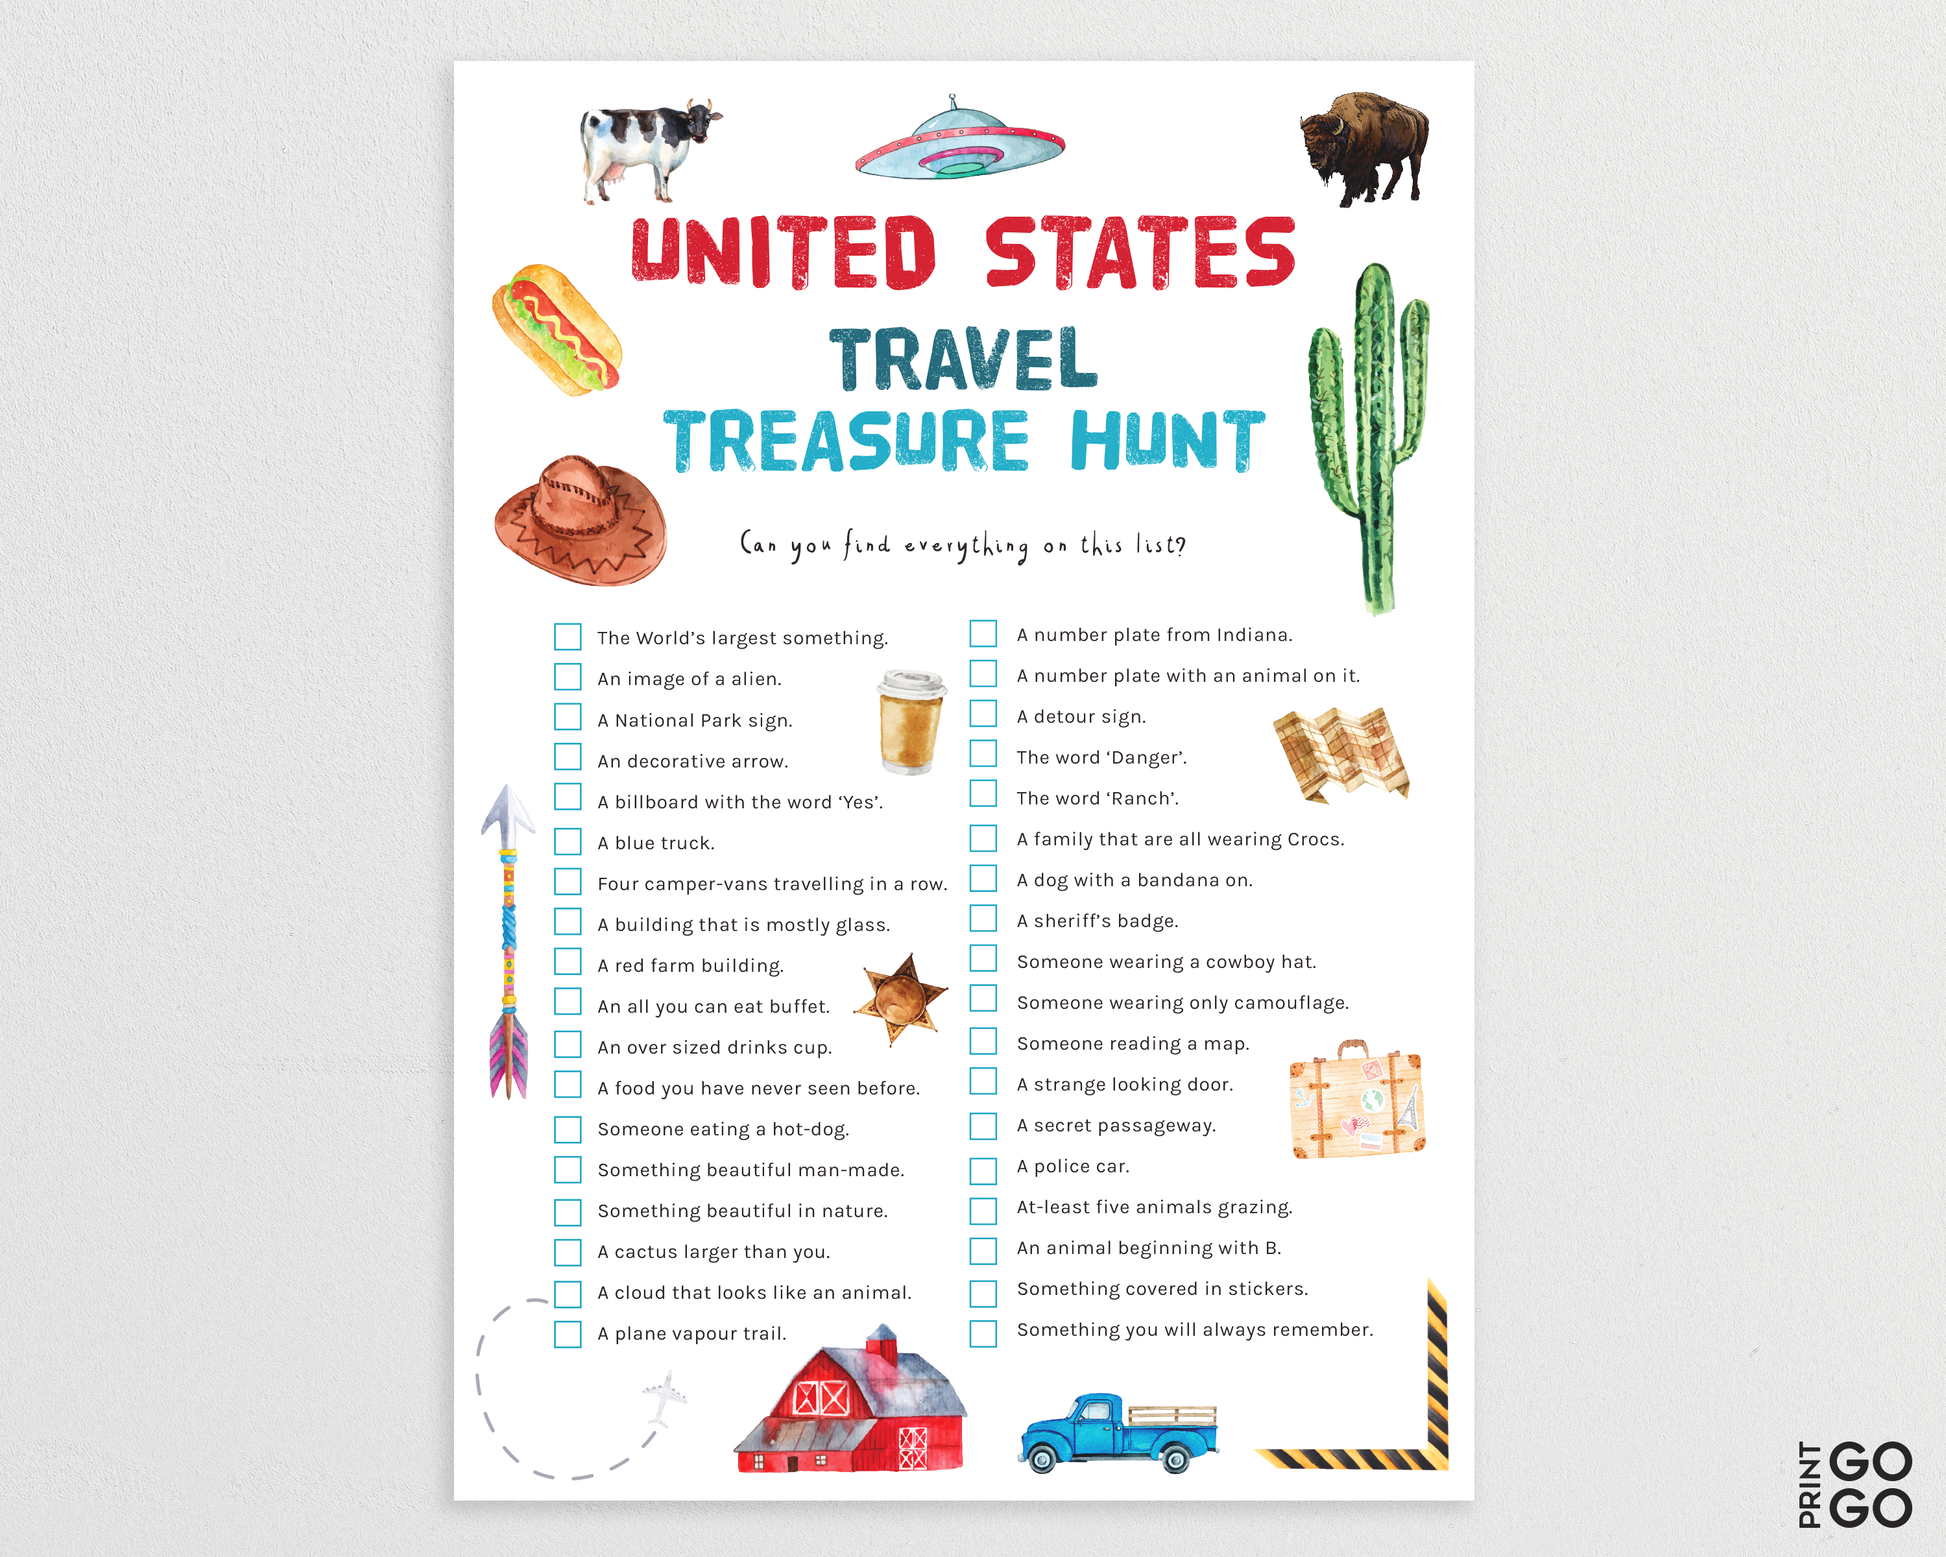 Spark curiosity in kids and keep them entertained on your holiday, or staycation, in the United States. Can they find all the items on the list?